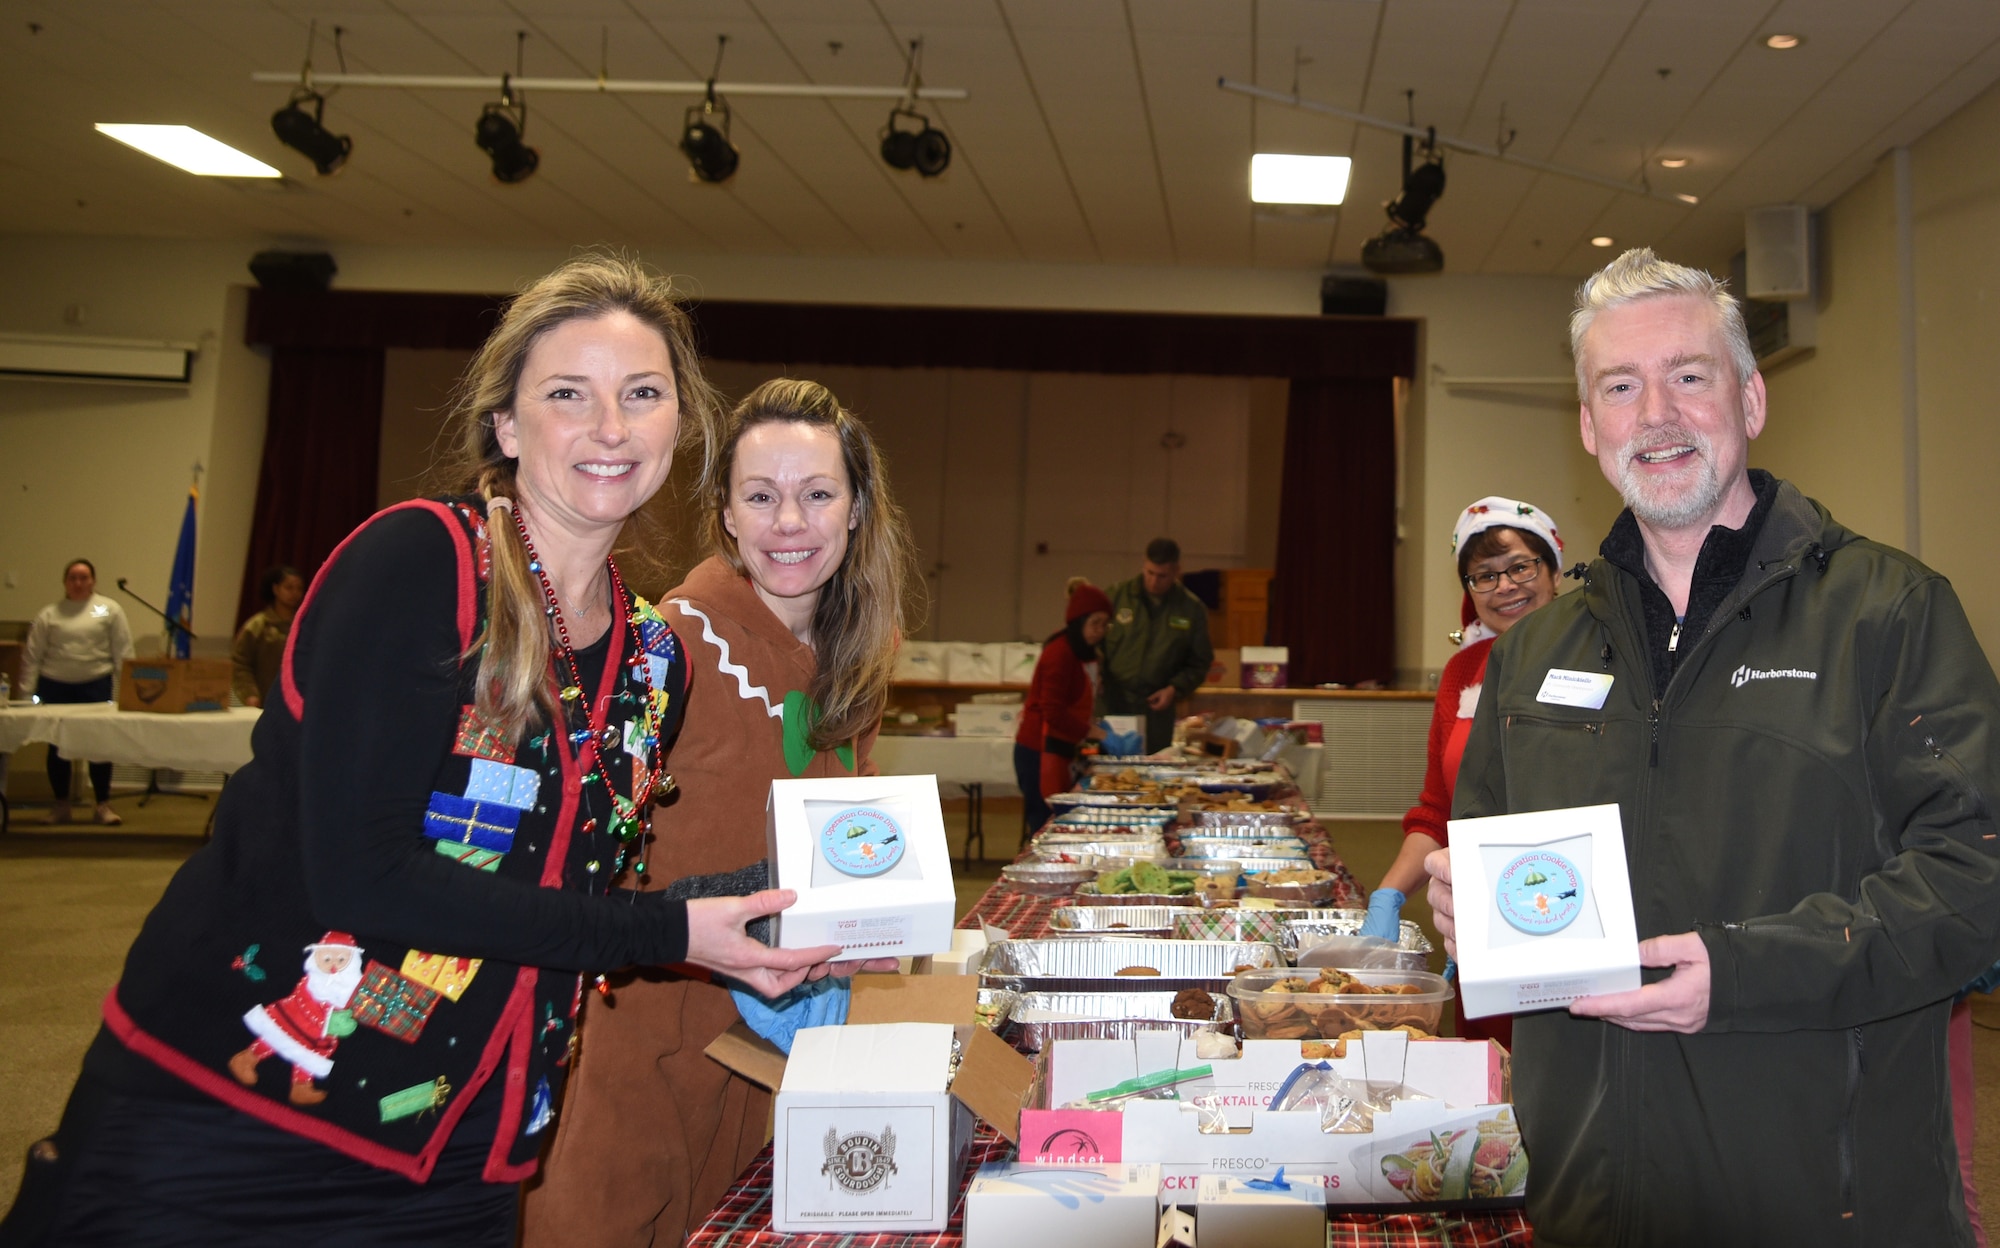 Mark Minickiello, right, vice president of community development at Harborstone Credit Union, poses for a picture with Team McChord volunteers during Operation Cookie Drop at Joint Base Lewis-McChord, Washington, Dec. 14, 2022. Minickiello donated the boxes and stickers that were used to distribute the cookies baked for Operation Cookie Drop. (U.S. Air Force photo by Airmen Kylee Tyus)